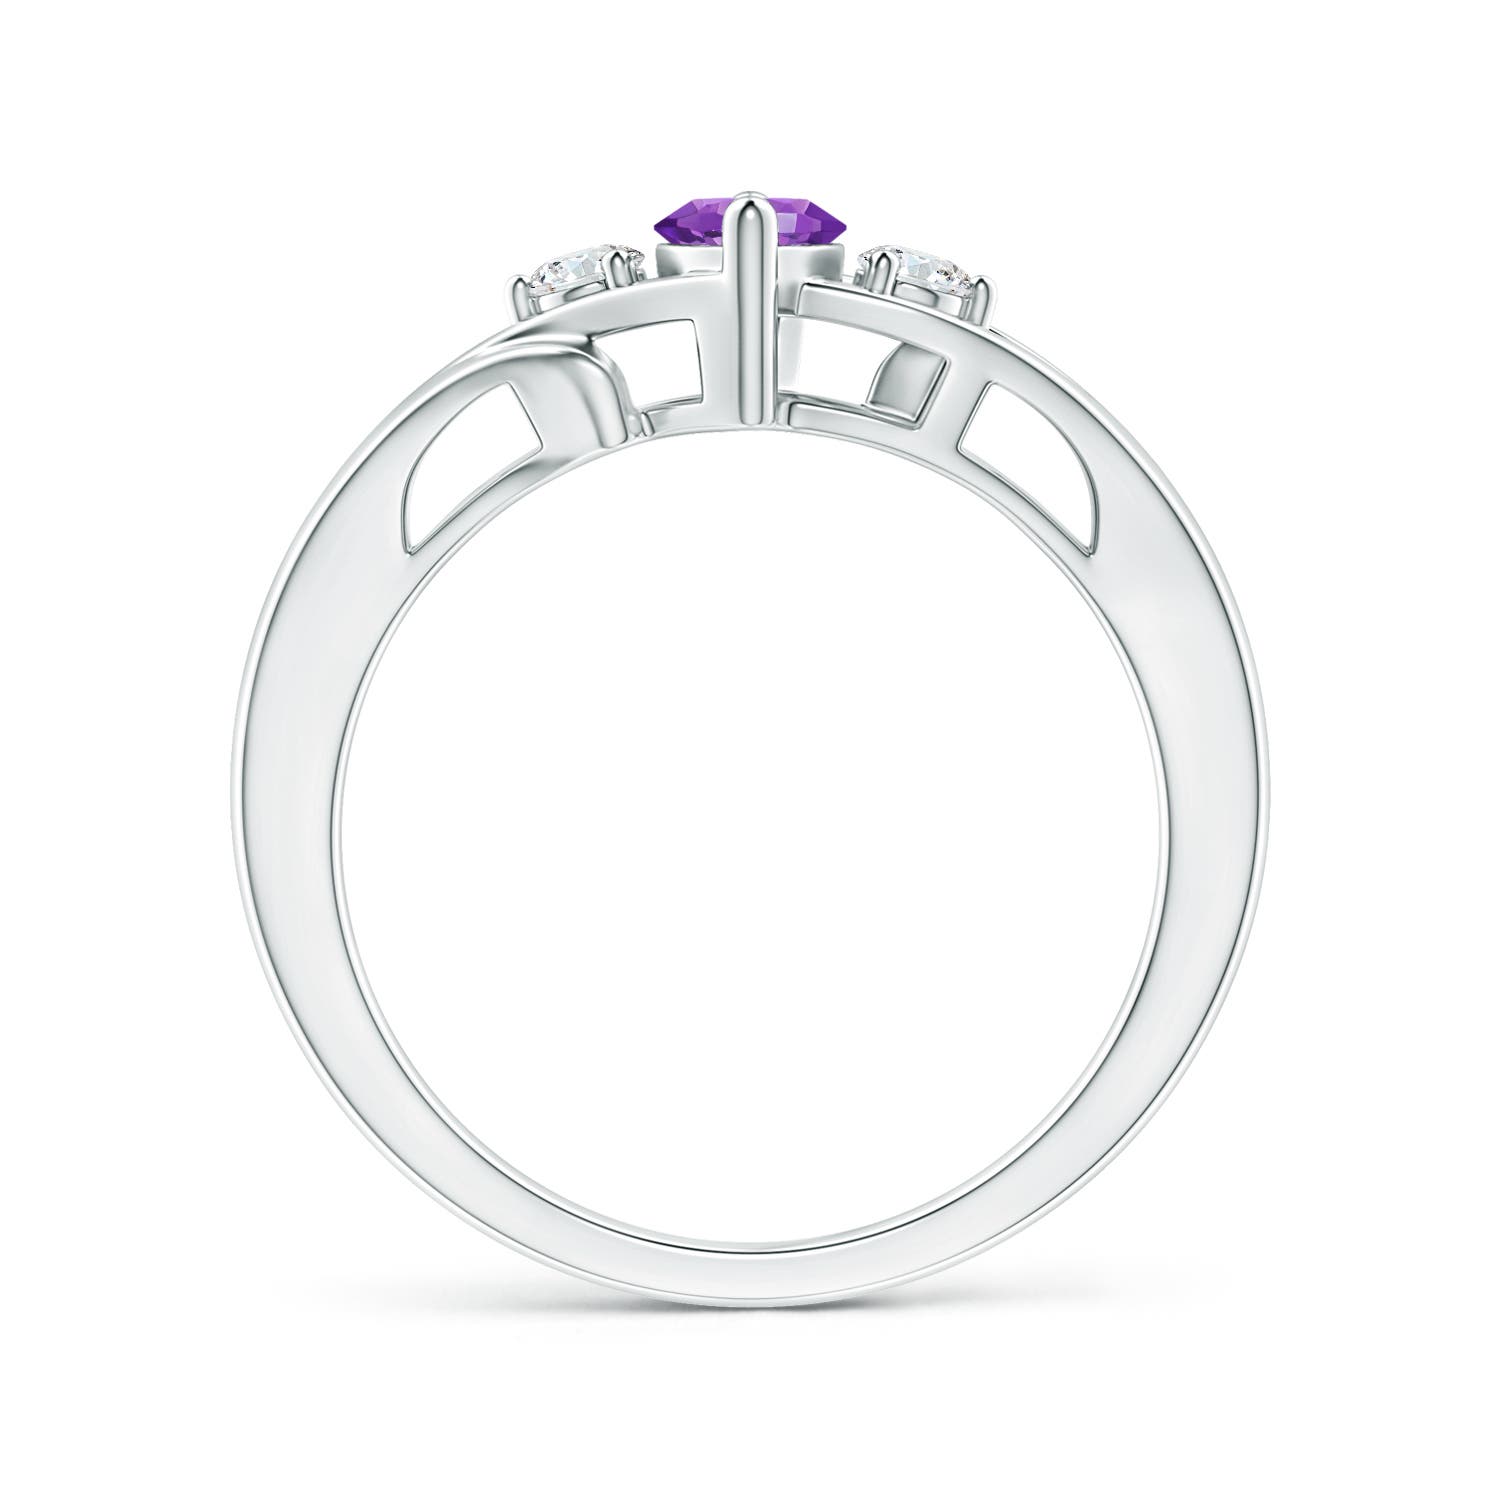 AAA - Amethyst / 0.64 CT / 14 KT White Gold